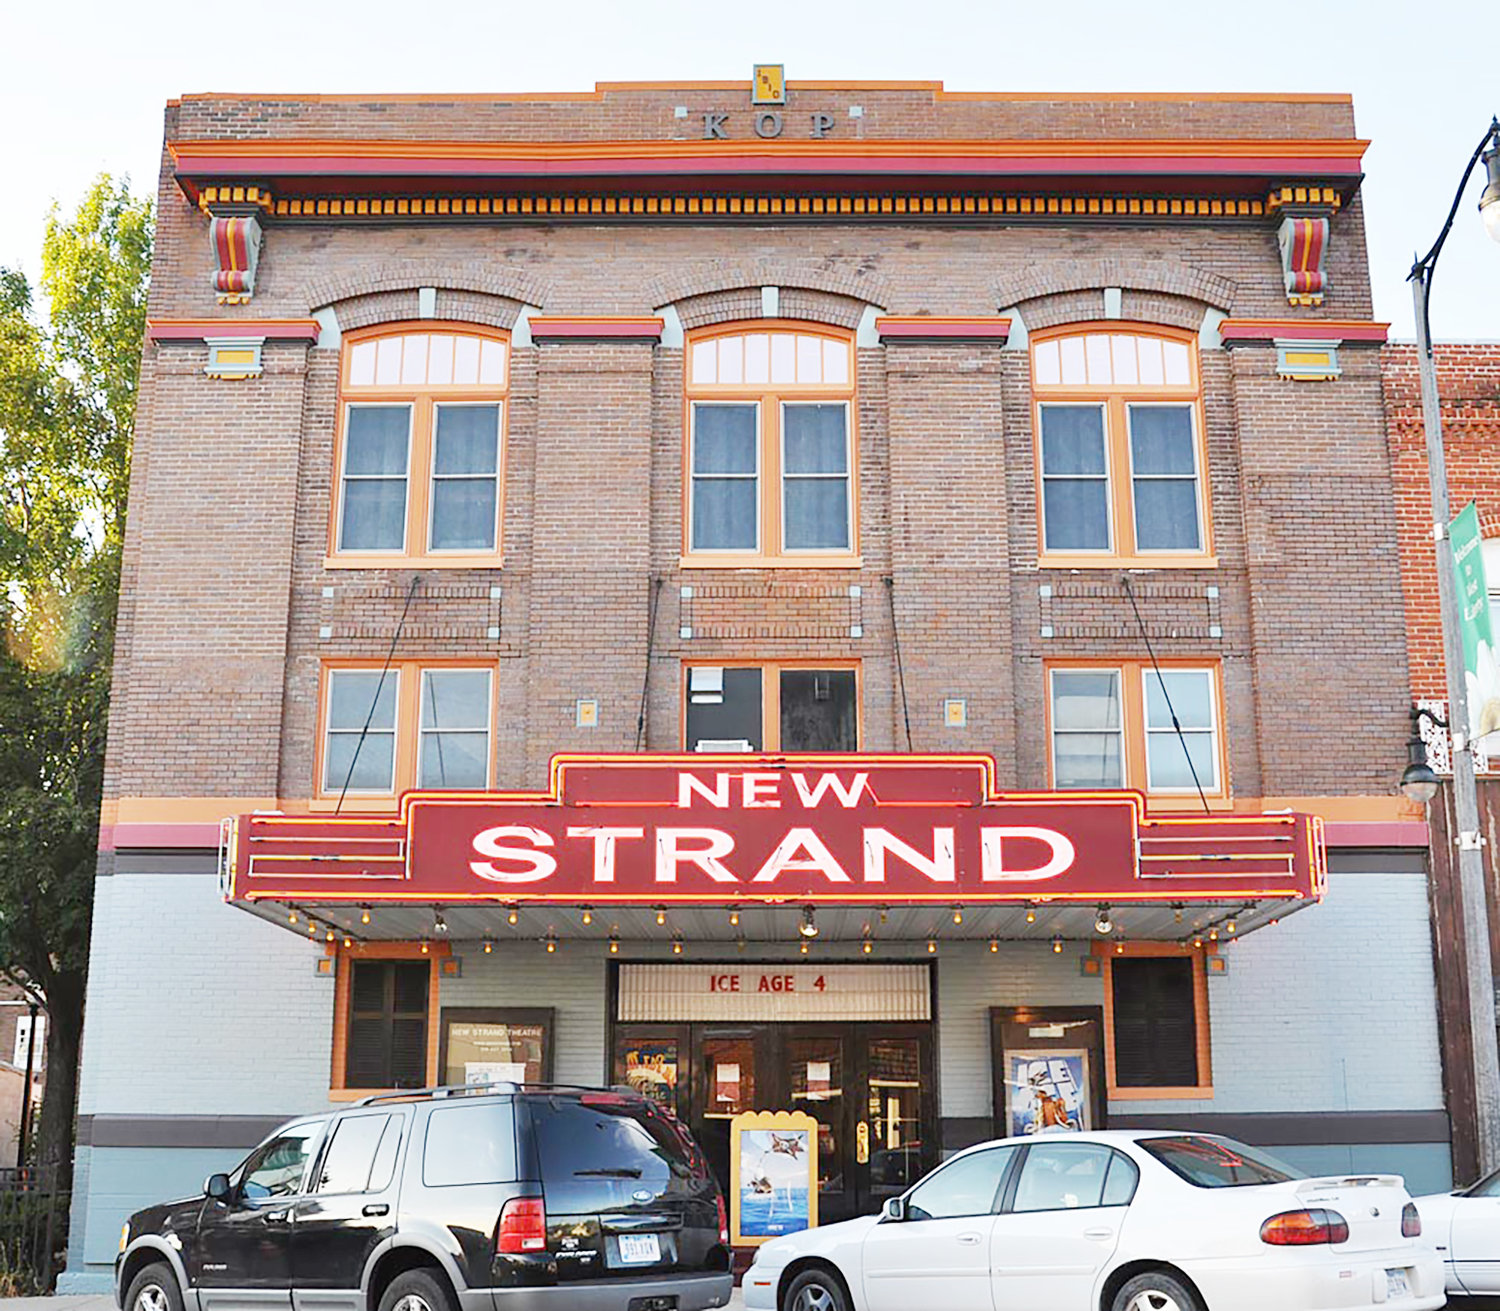 The New Strand Theatre has a single movie screen and stage. The theater seats 230 people and has showings Friday night, matinees Saturday and Sunday and evening showings Saturday night.